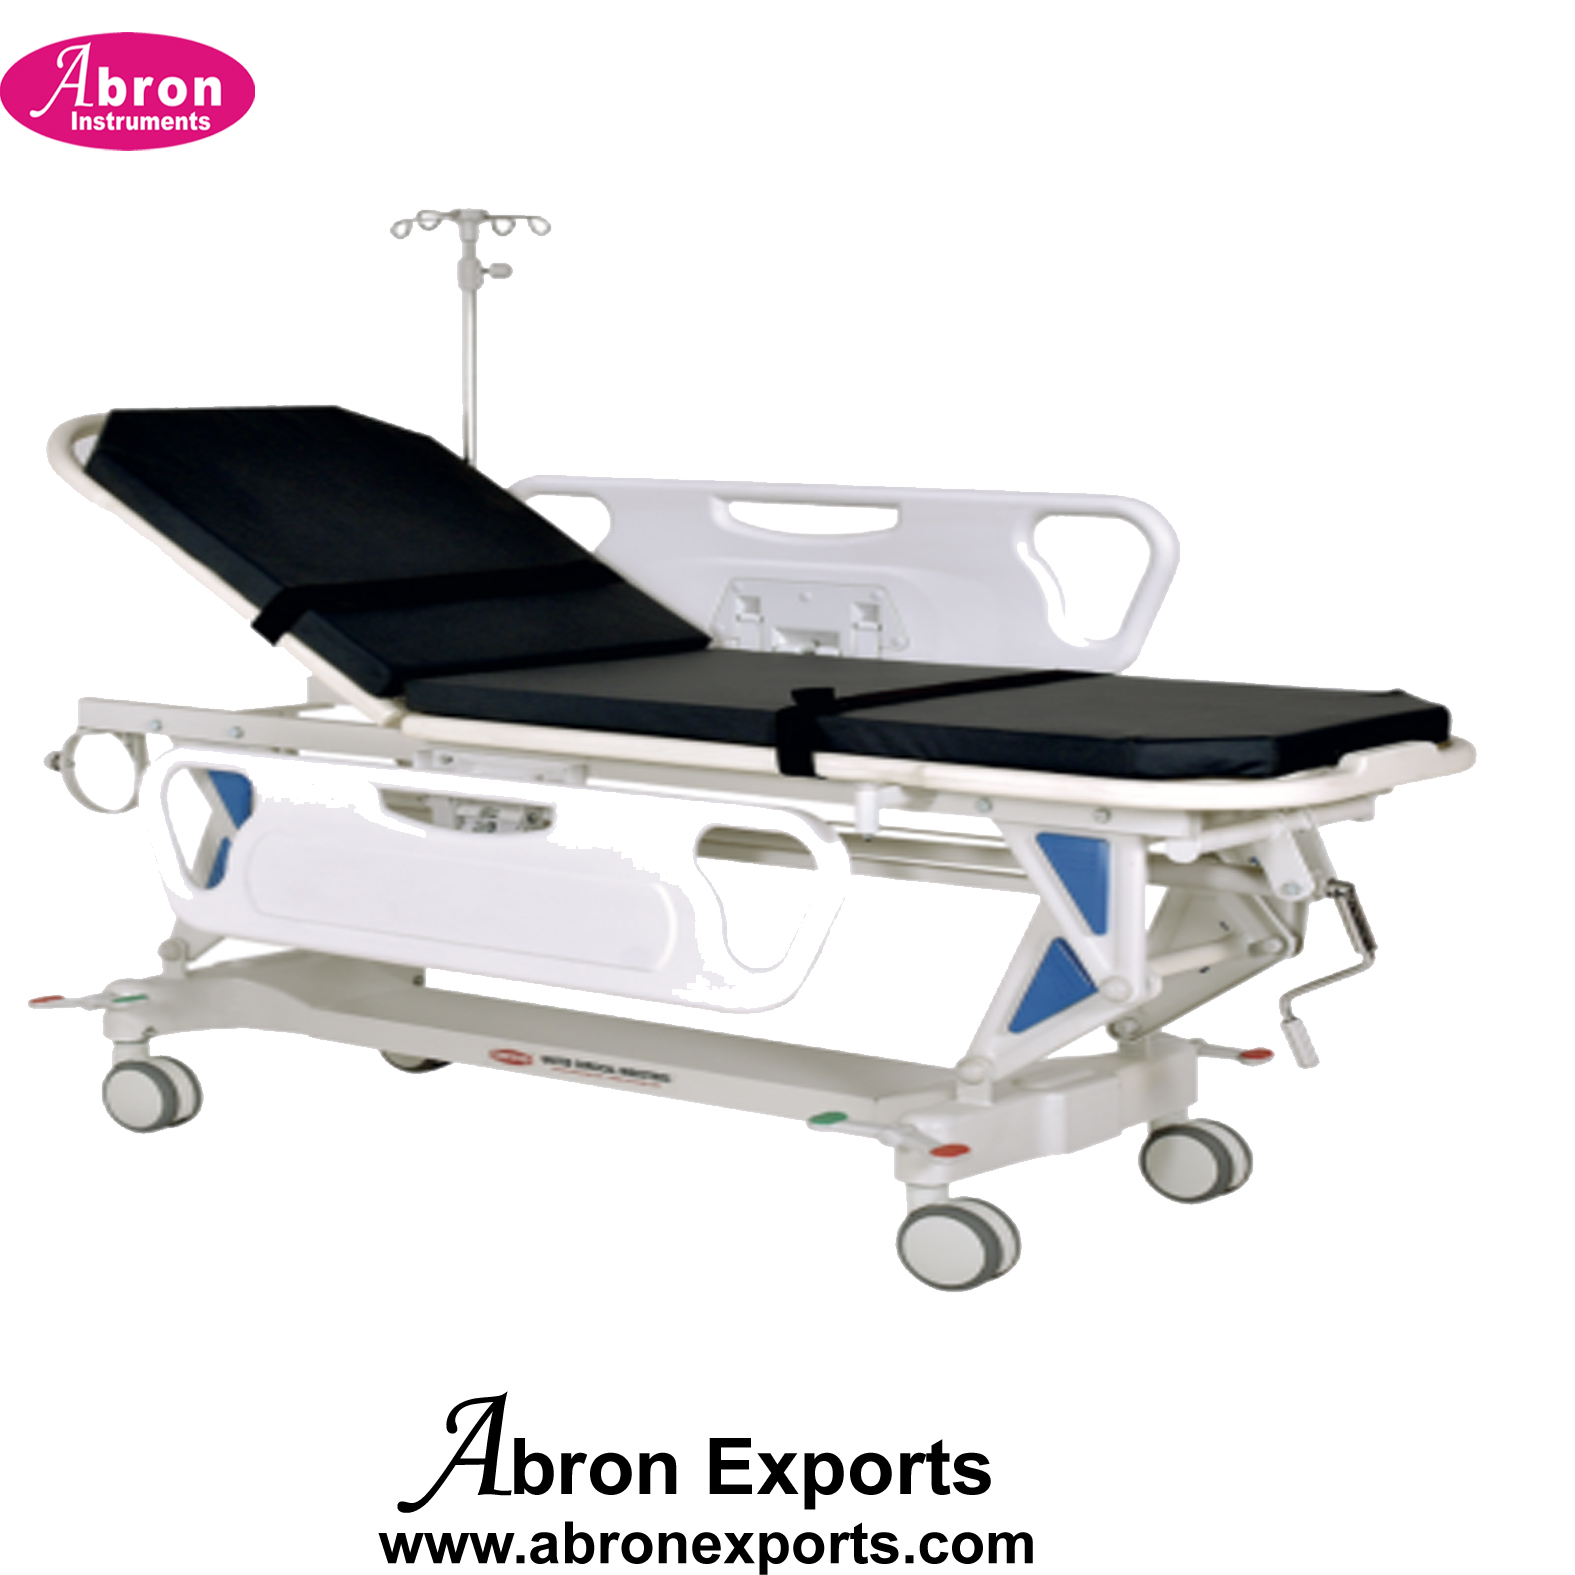 Patient Trolly Stretcher IV Stand Manual ANS 4 With Matress 4 Wheels Surgical Hospital Medical U3 Abron ABM-2261ST3M 